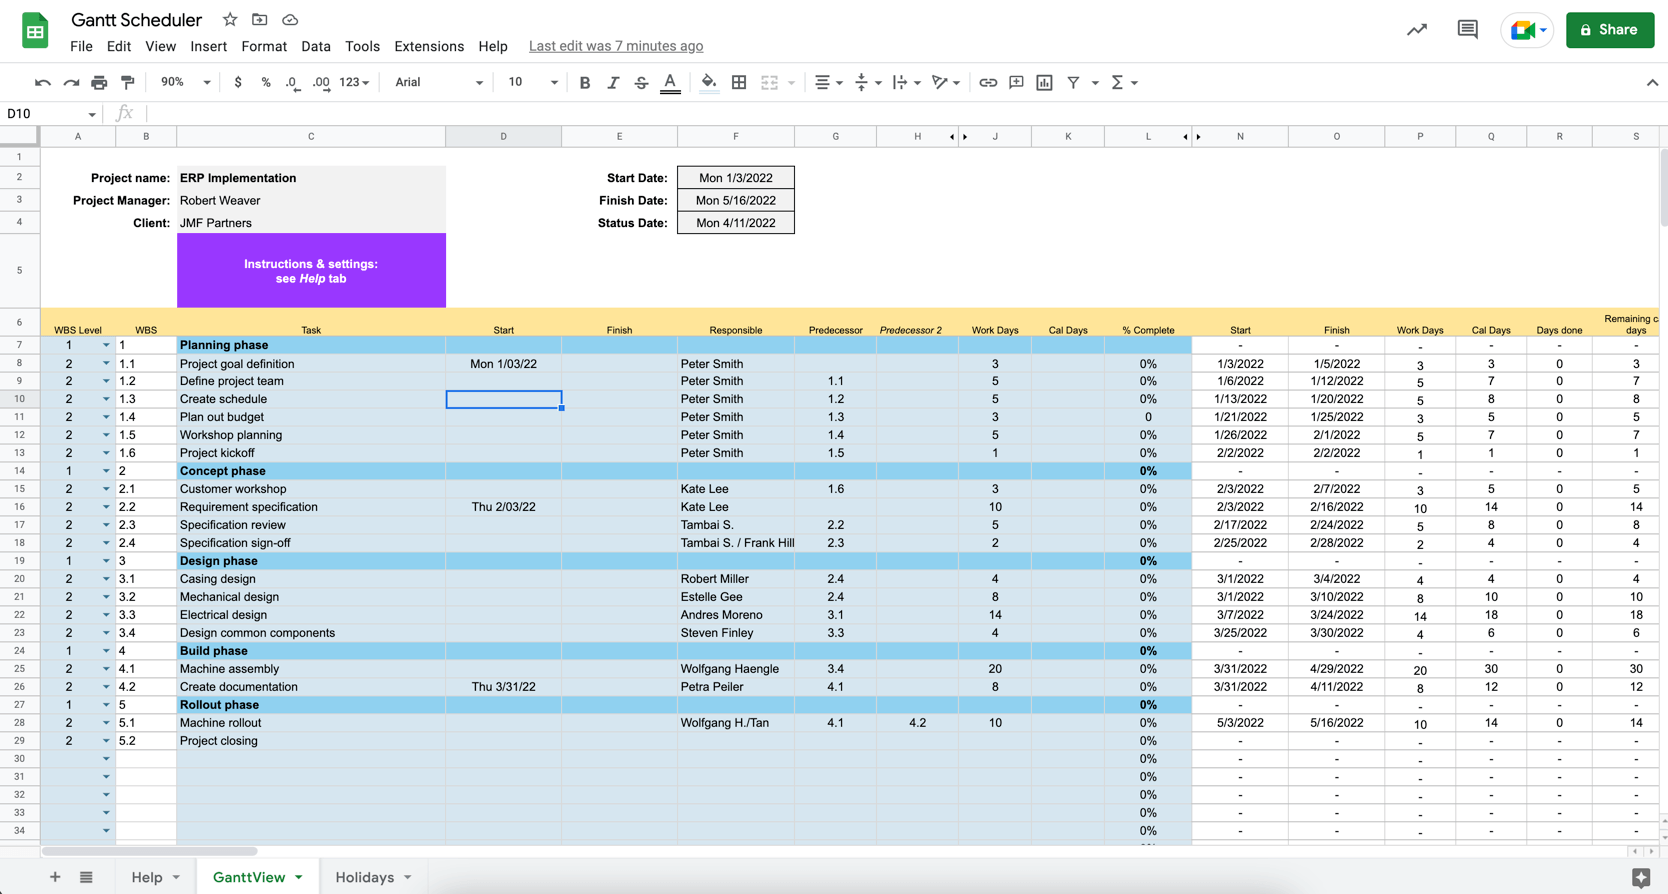 Project Scheduling Tool for Google Sheets